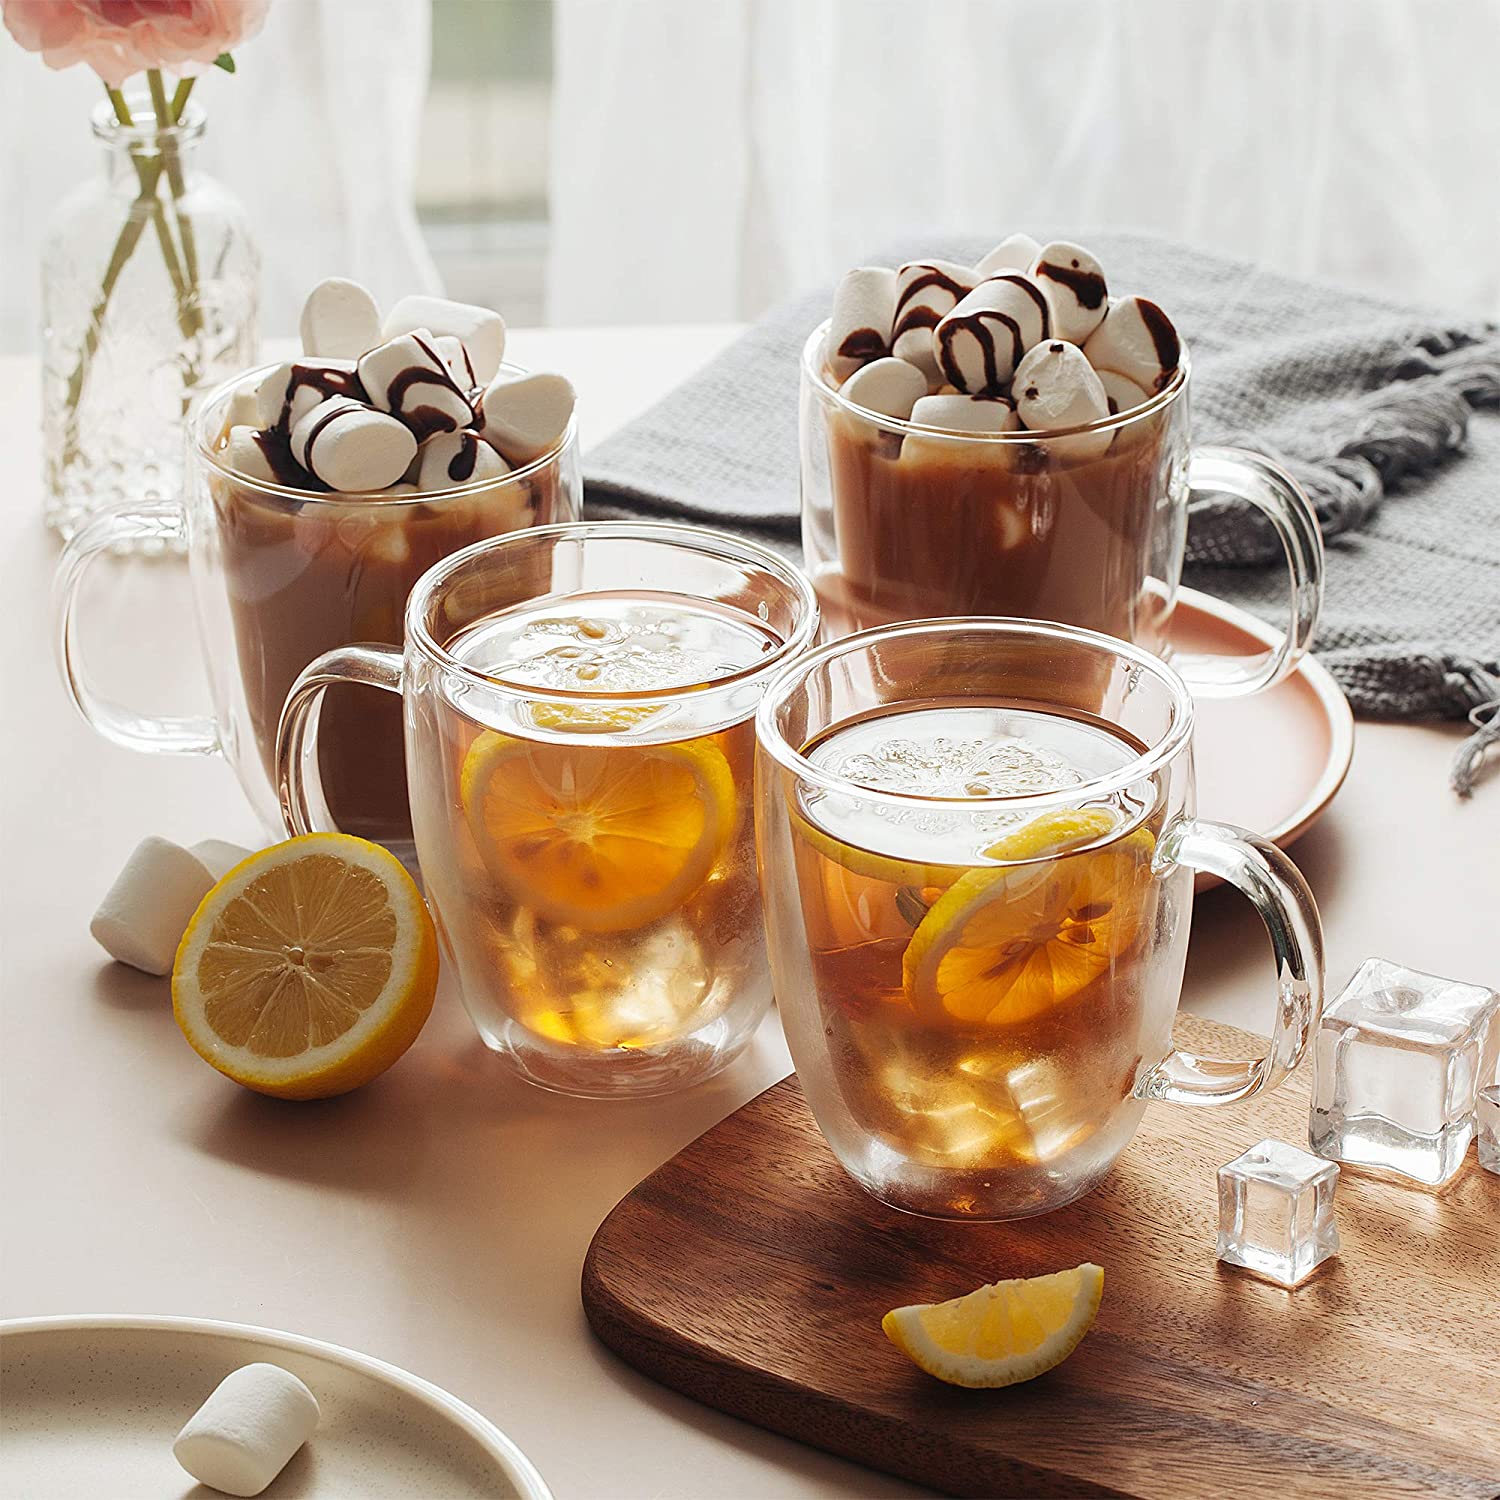 hot chocolate and tea with lemon steeping in glass mugs